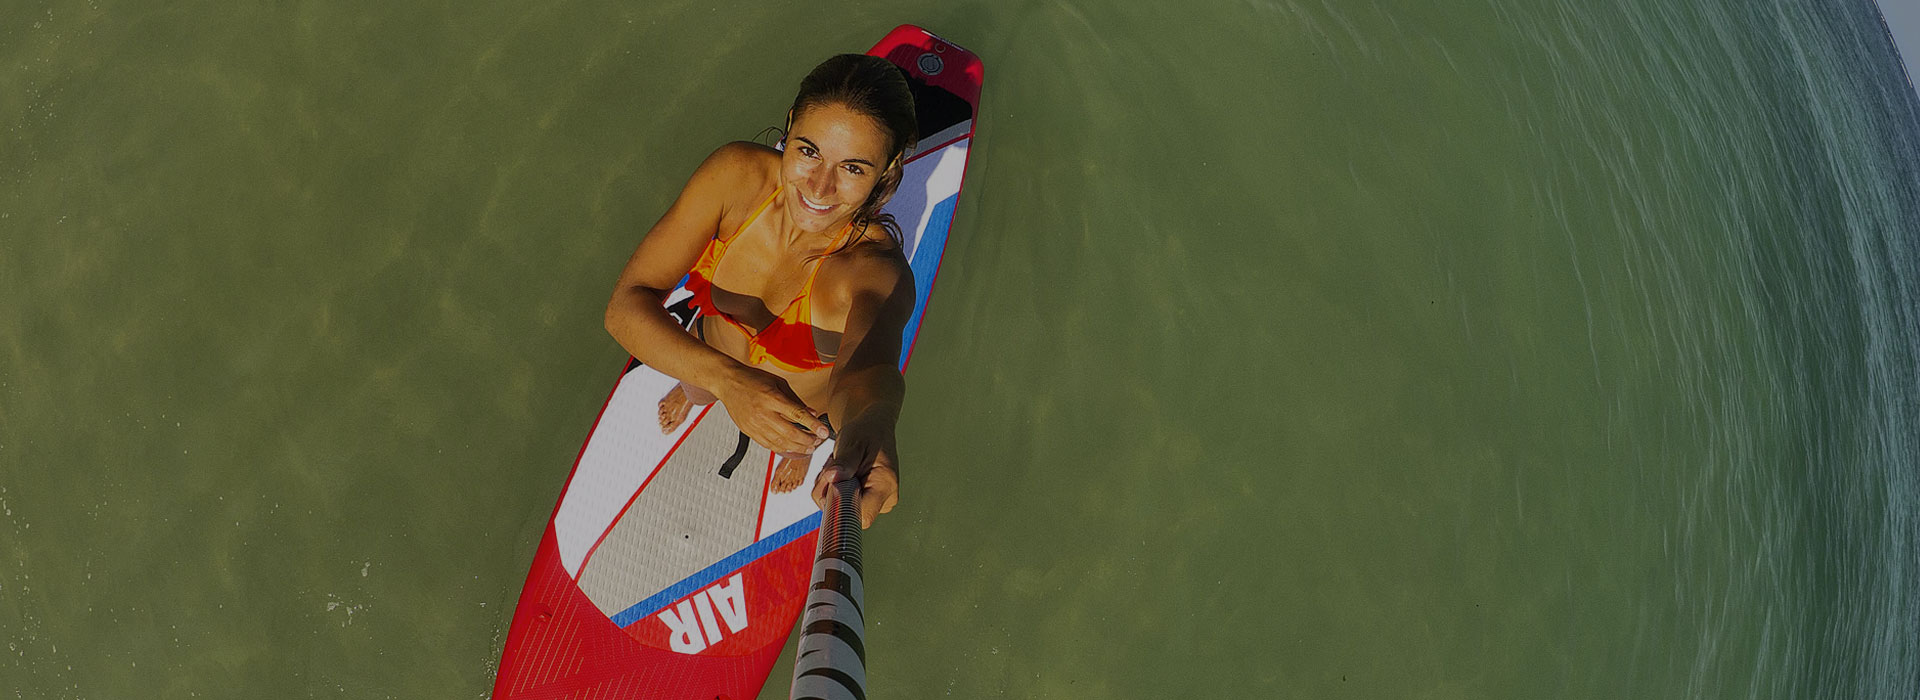 STAND UP PADDLE BOARDING HOLIDAYS